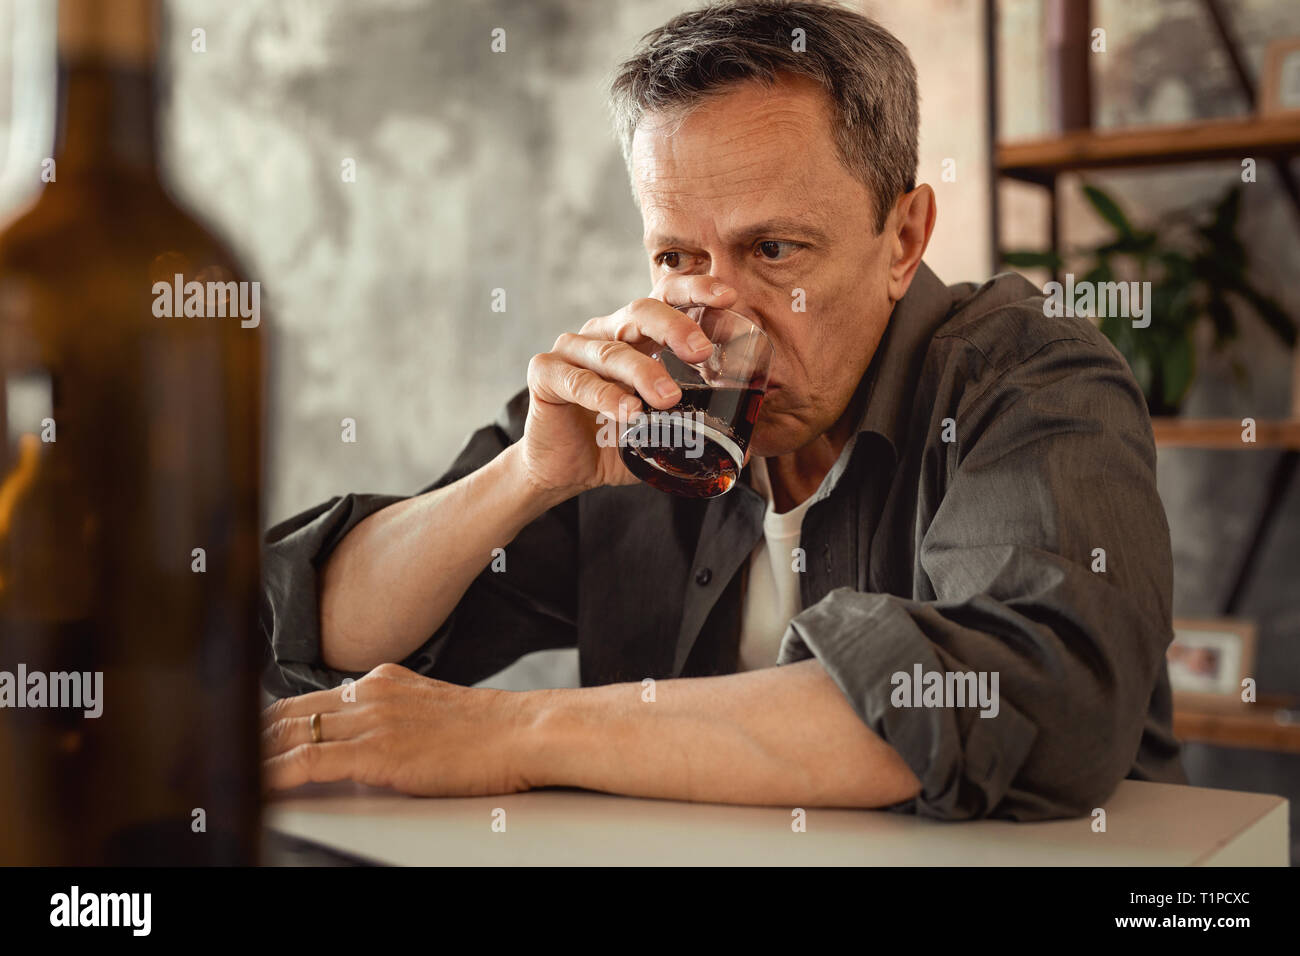 Apathetic grey-haired man sipping alcohol from glass Stock Photo